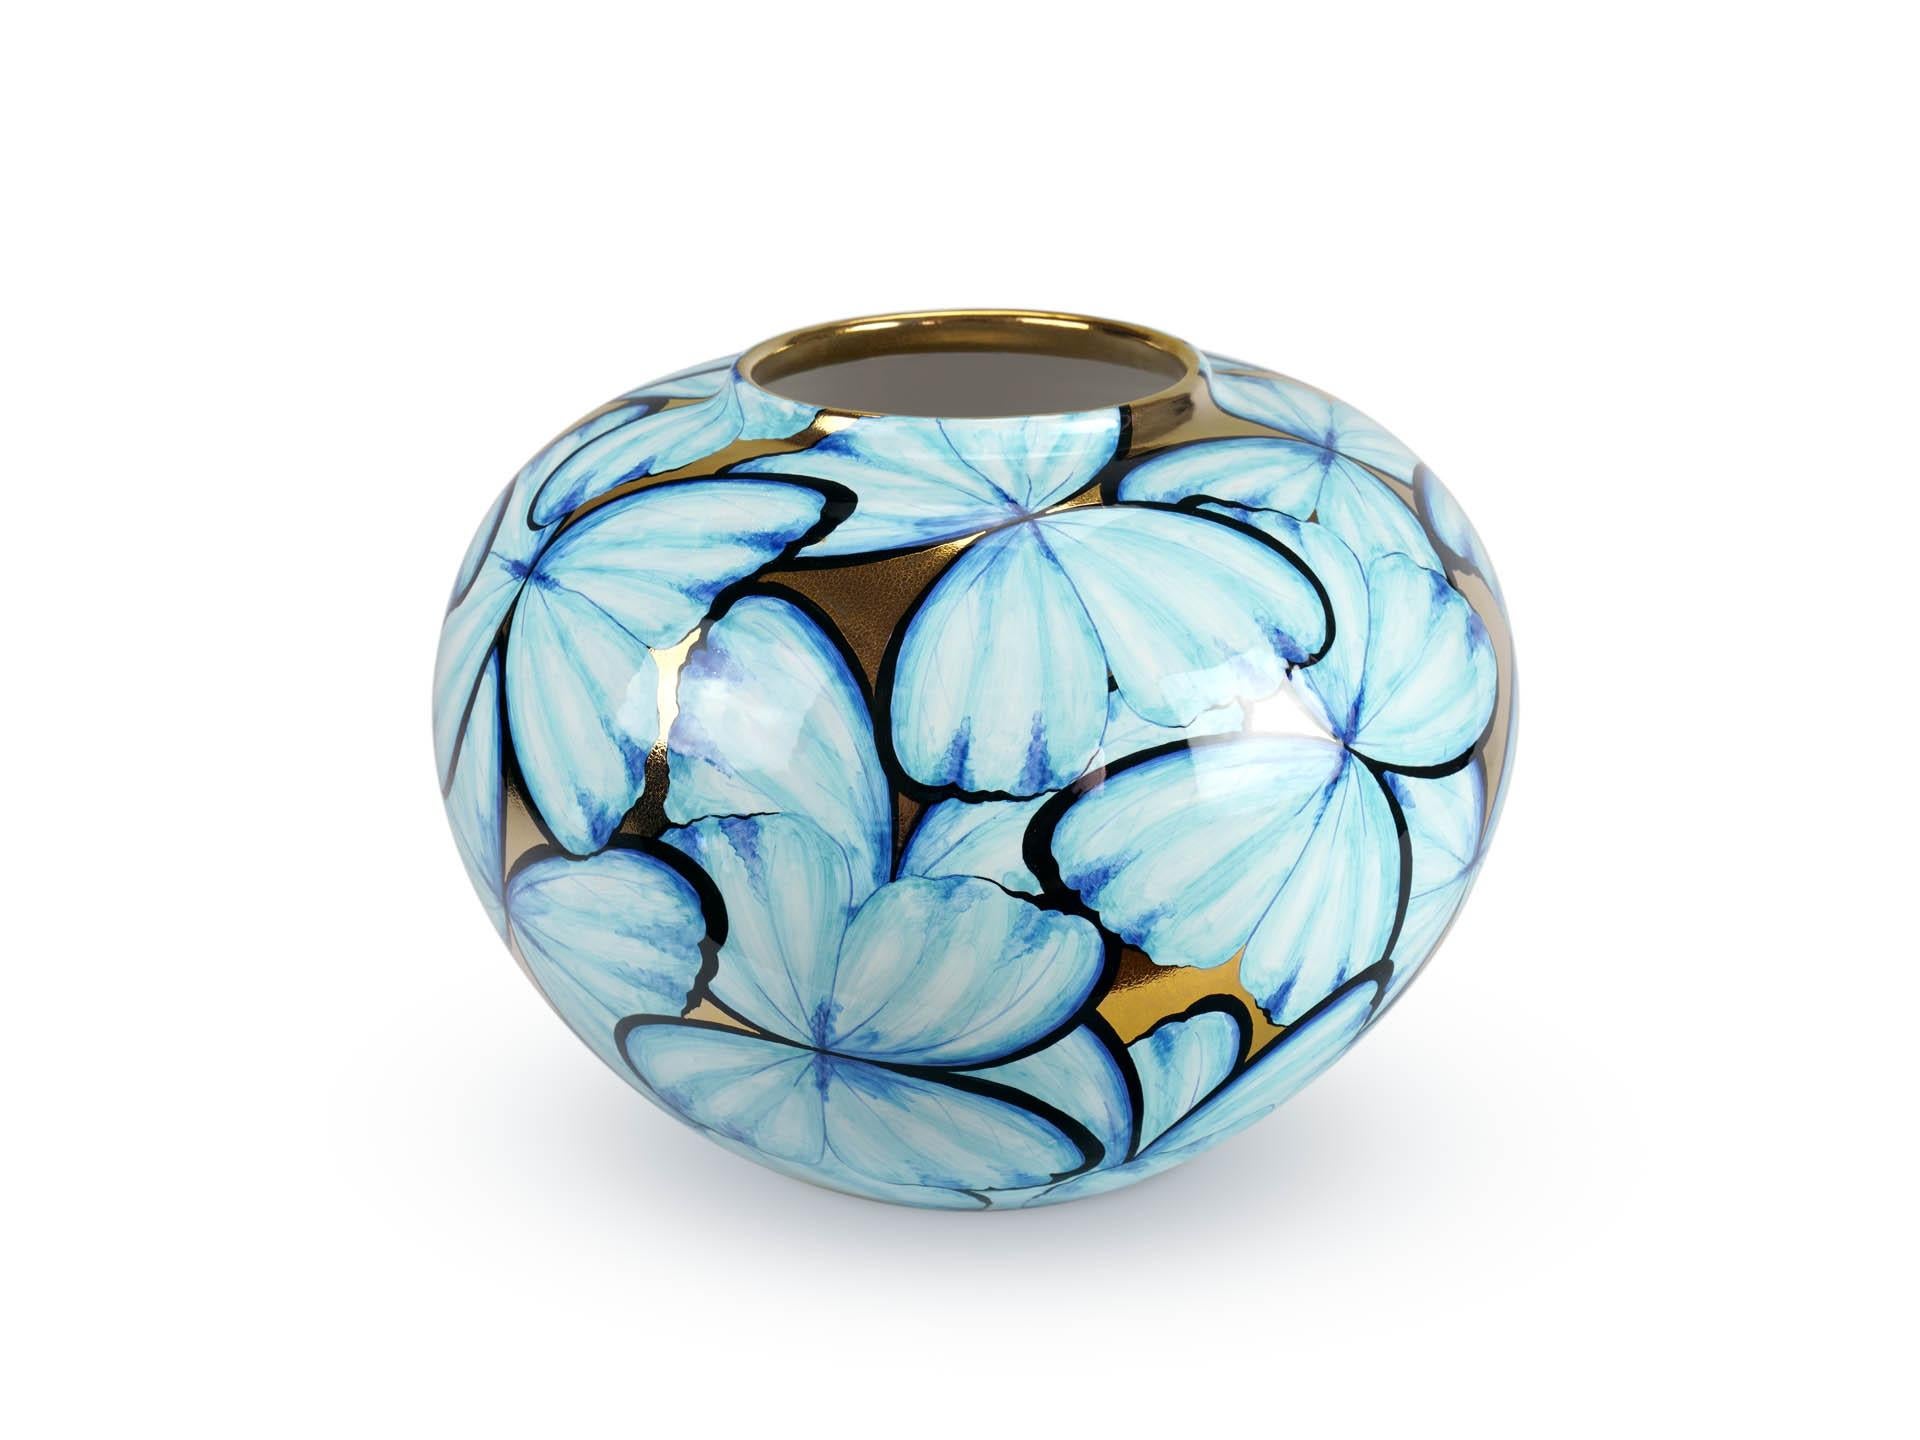 Hand-Crafted Italian Hand-Painted Ceramic Vase Blue Butterflies on 24kt Gold Accented Surface For Sale